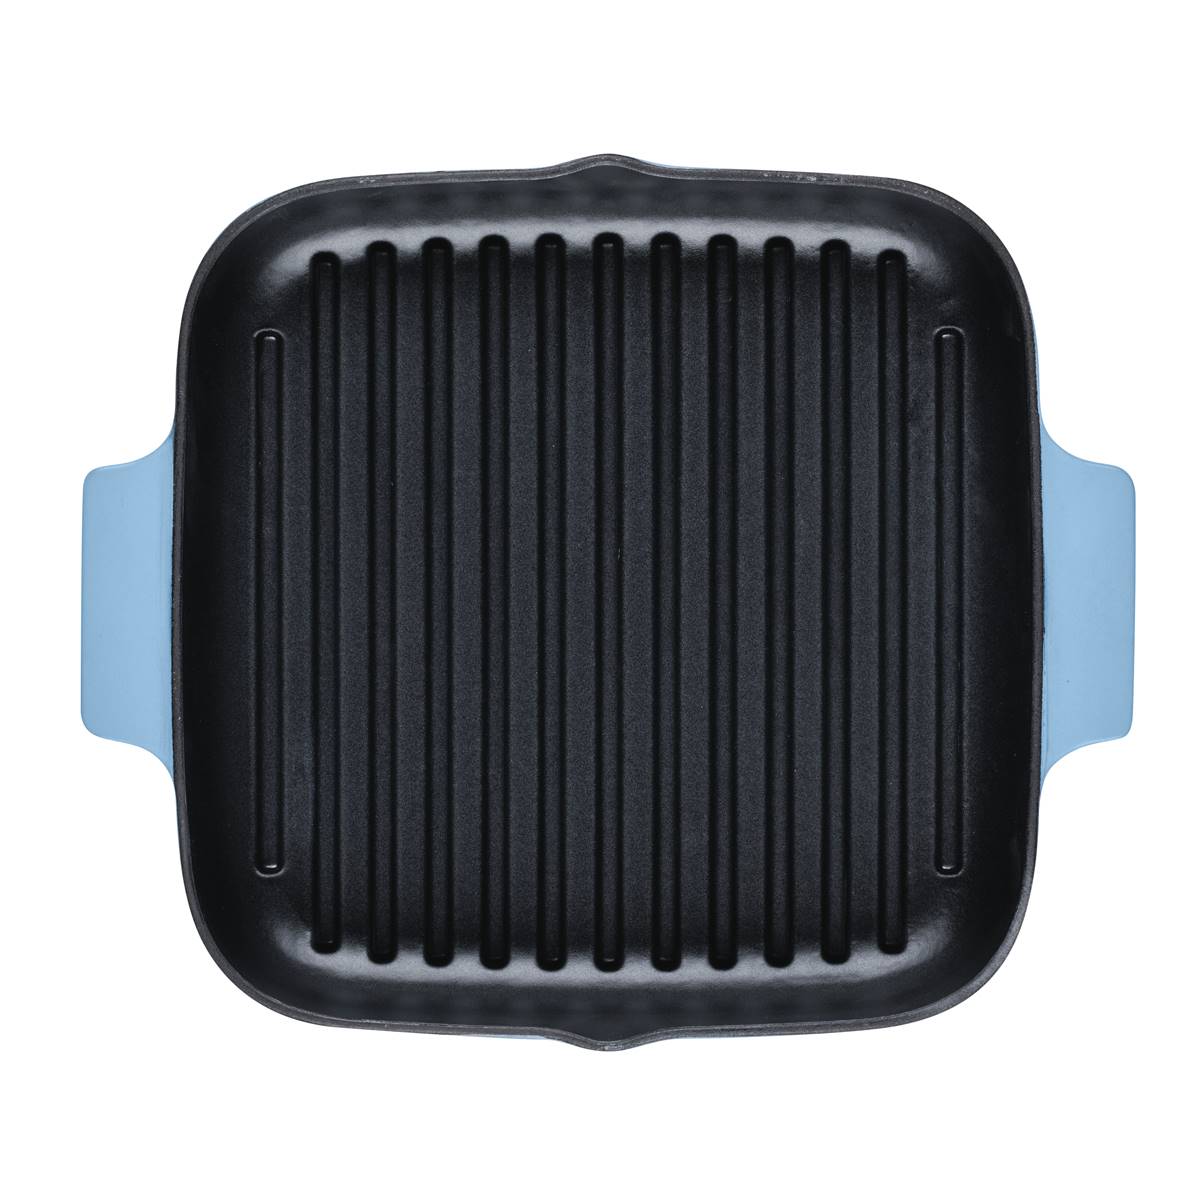 KitchenAid(R) 11in. Enameled Cast Iron Square Grill Pan - Blue